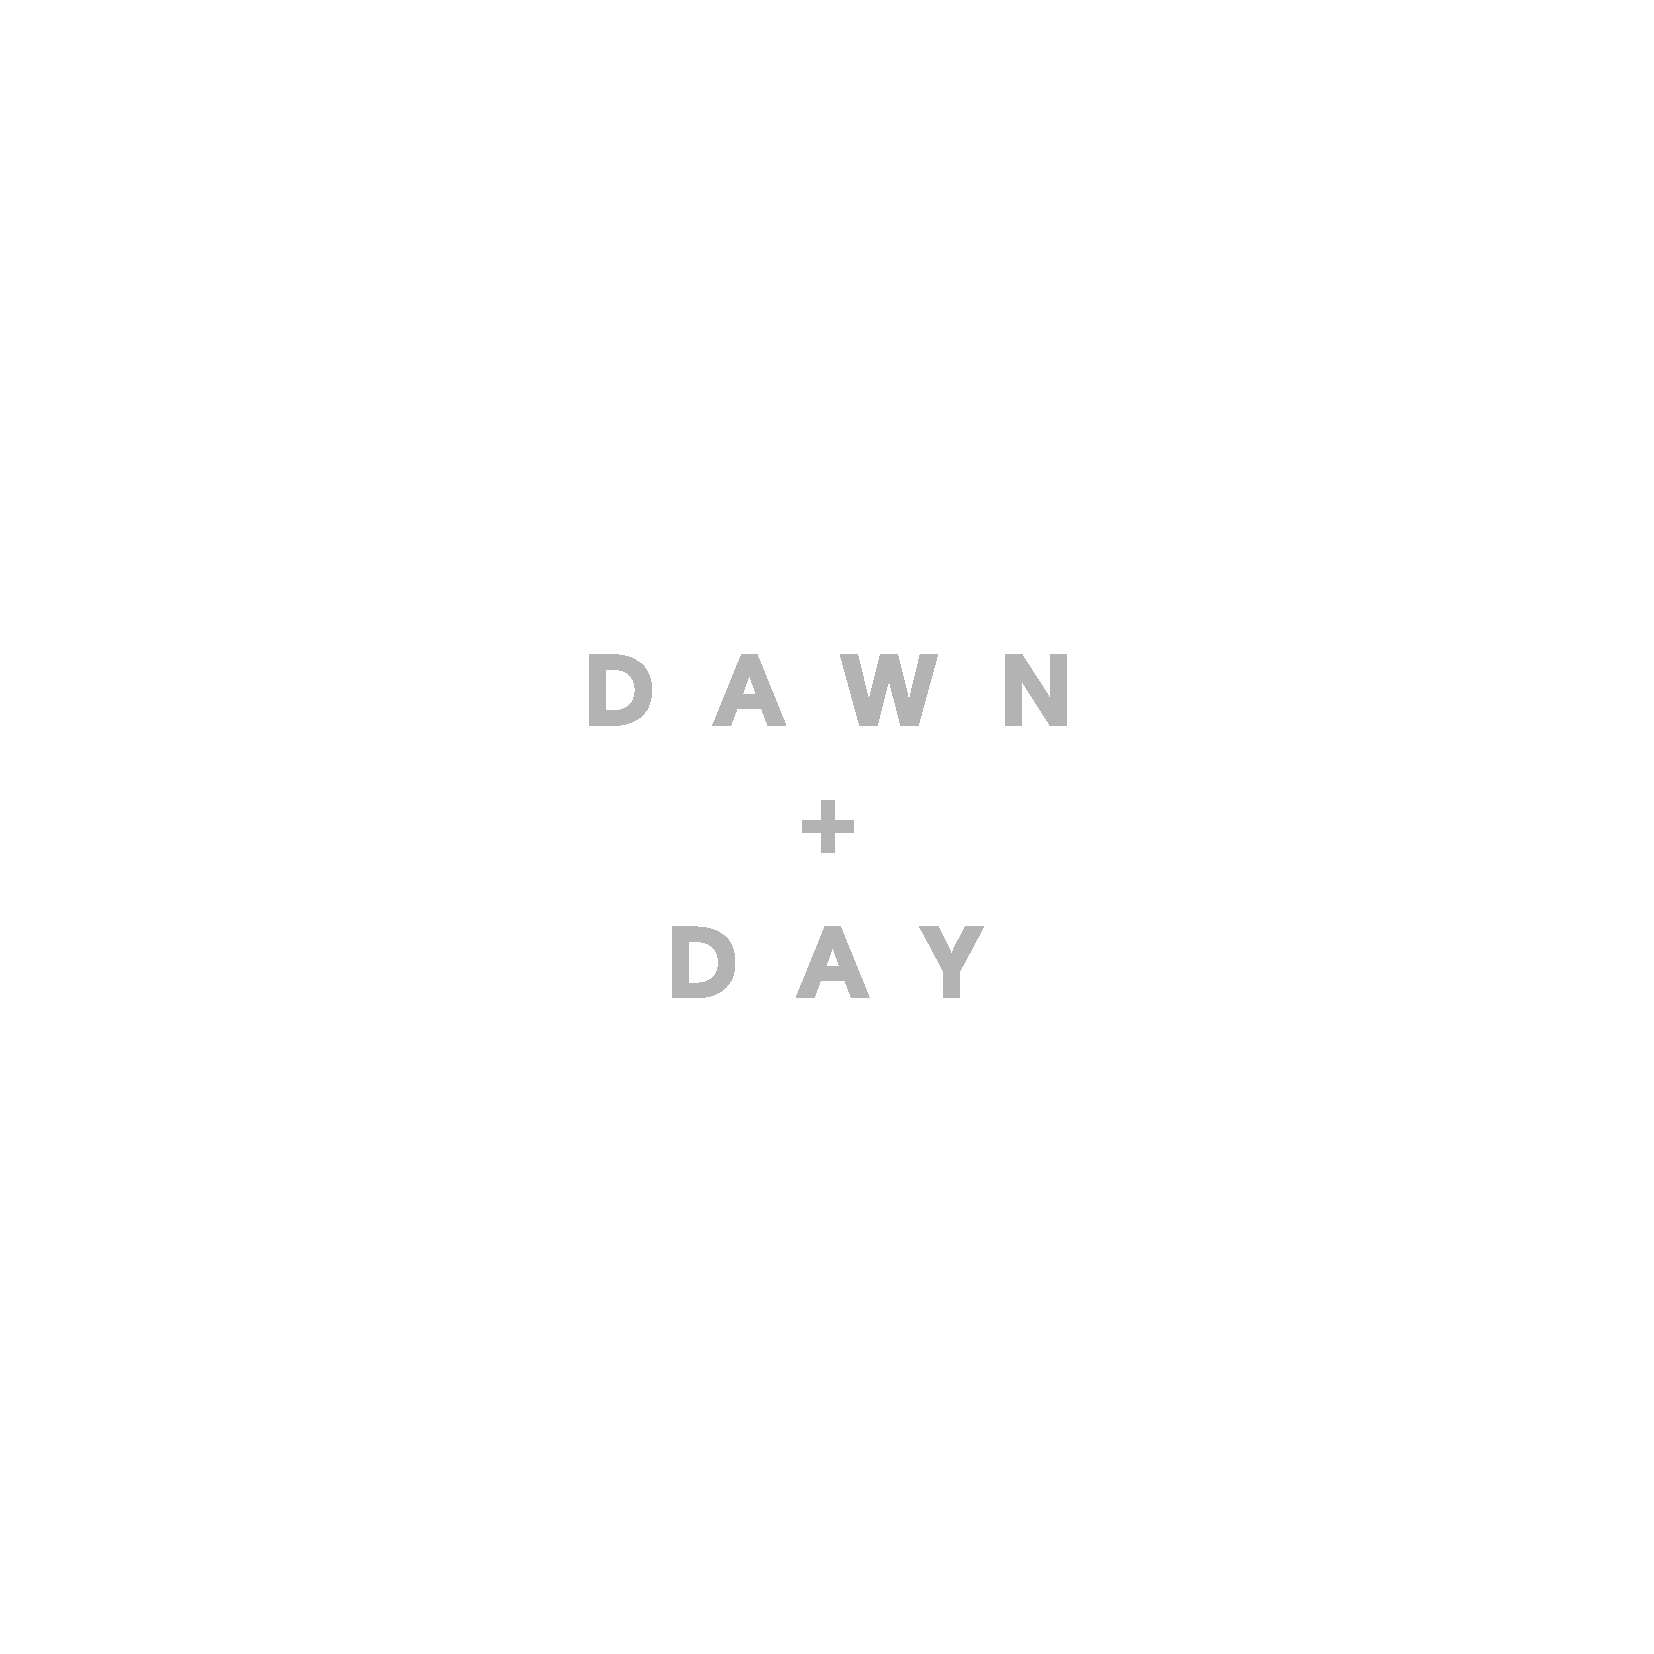 Dawn and Day